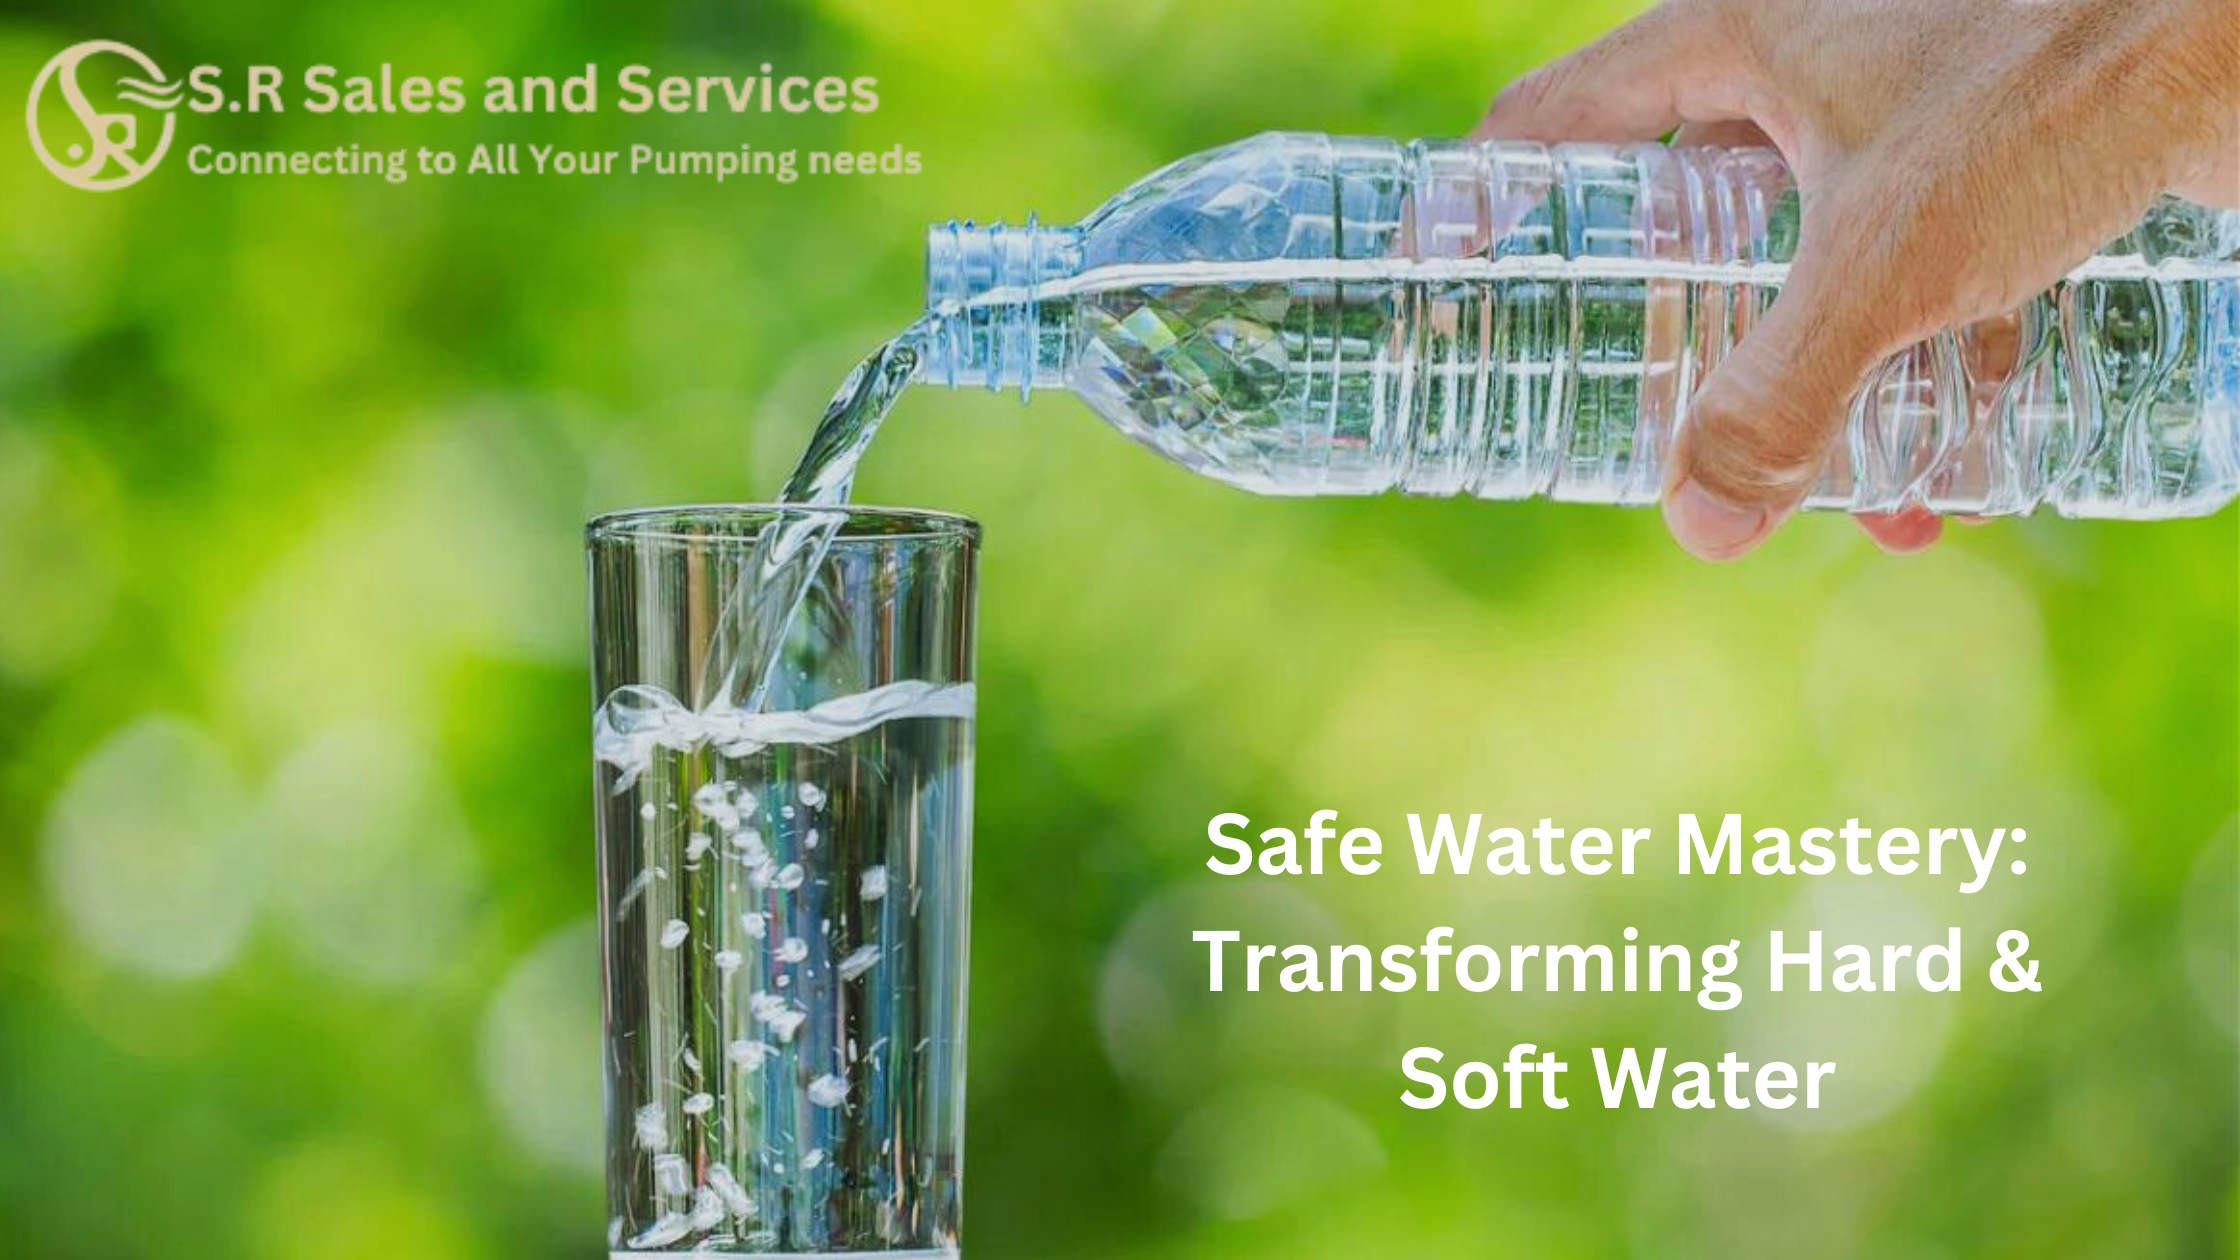 water hardness, soft water, hard water, water softening, water quality, minerals in water, safe water, S.R Sales & Services, water solutions, clean water, home appliances, eco-friendly water, water treatment